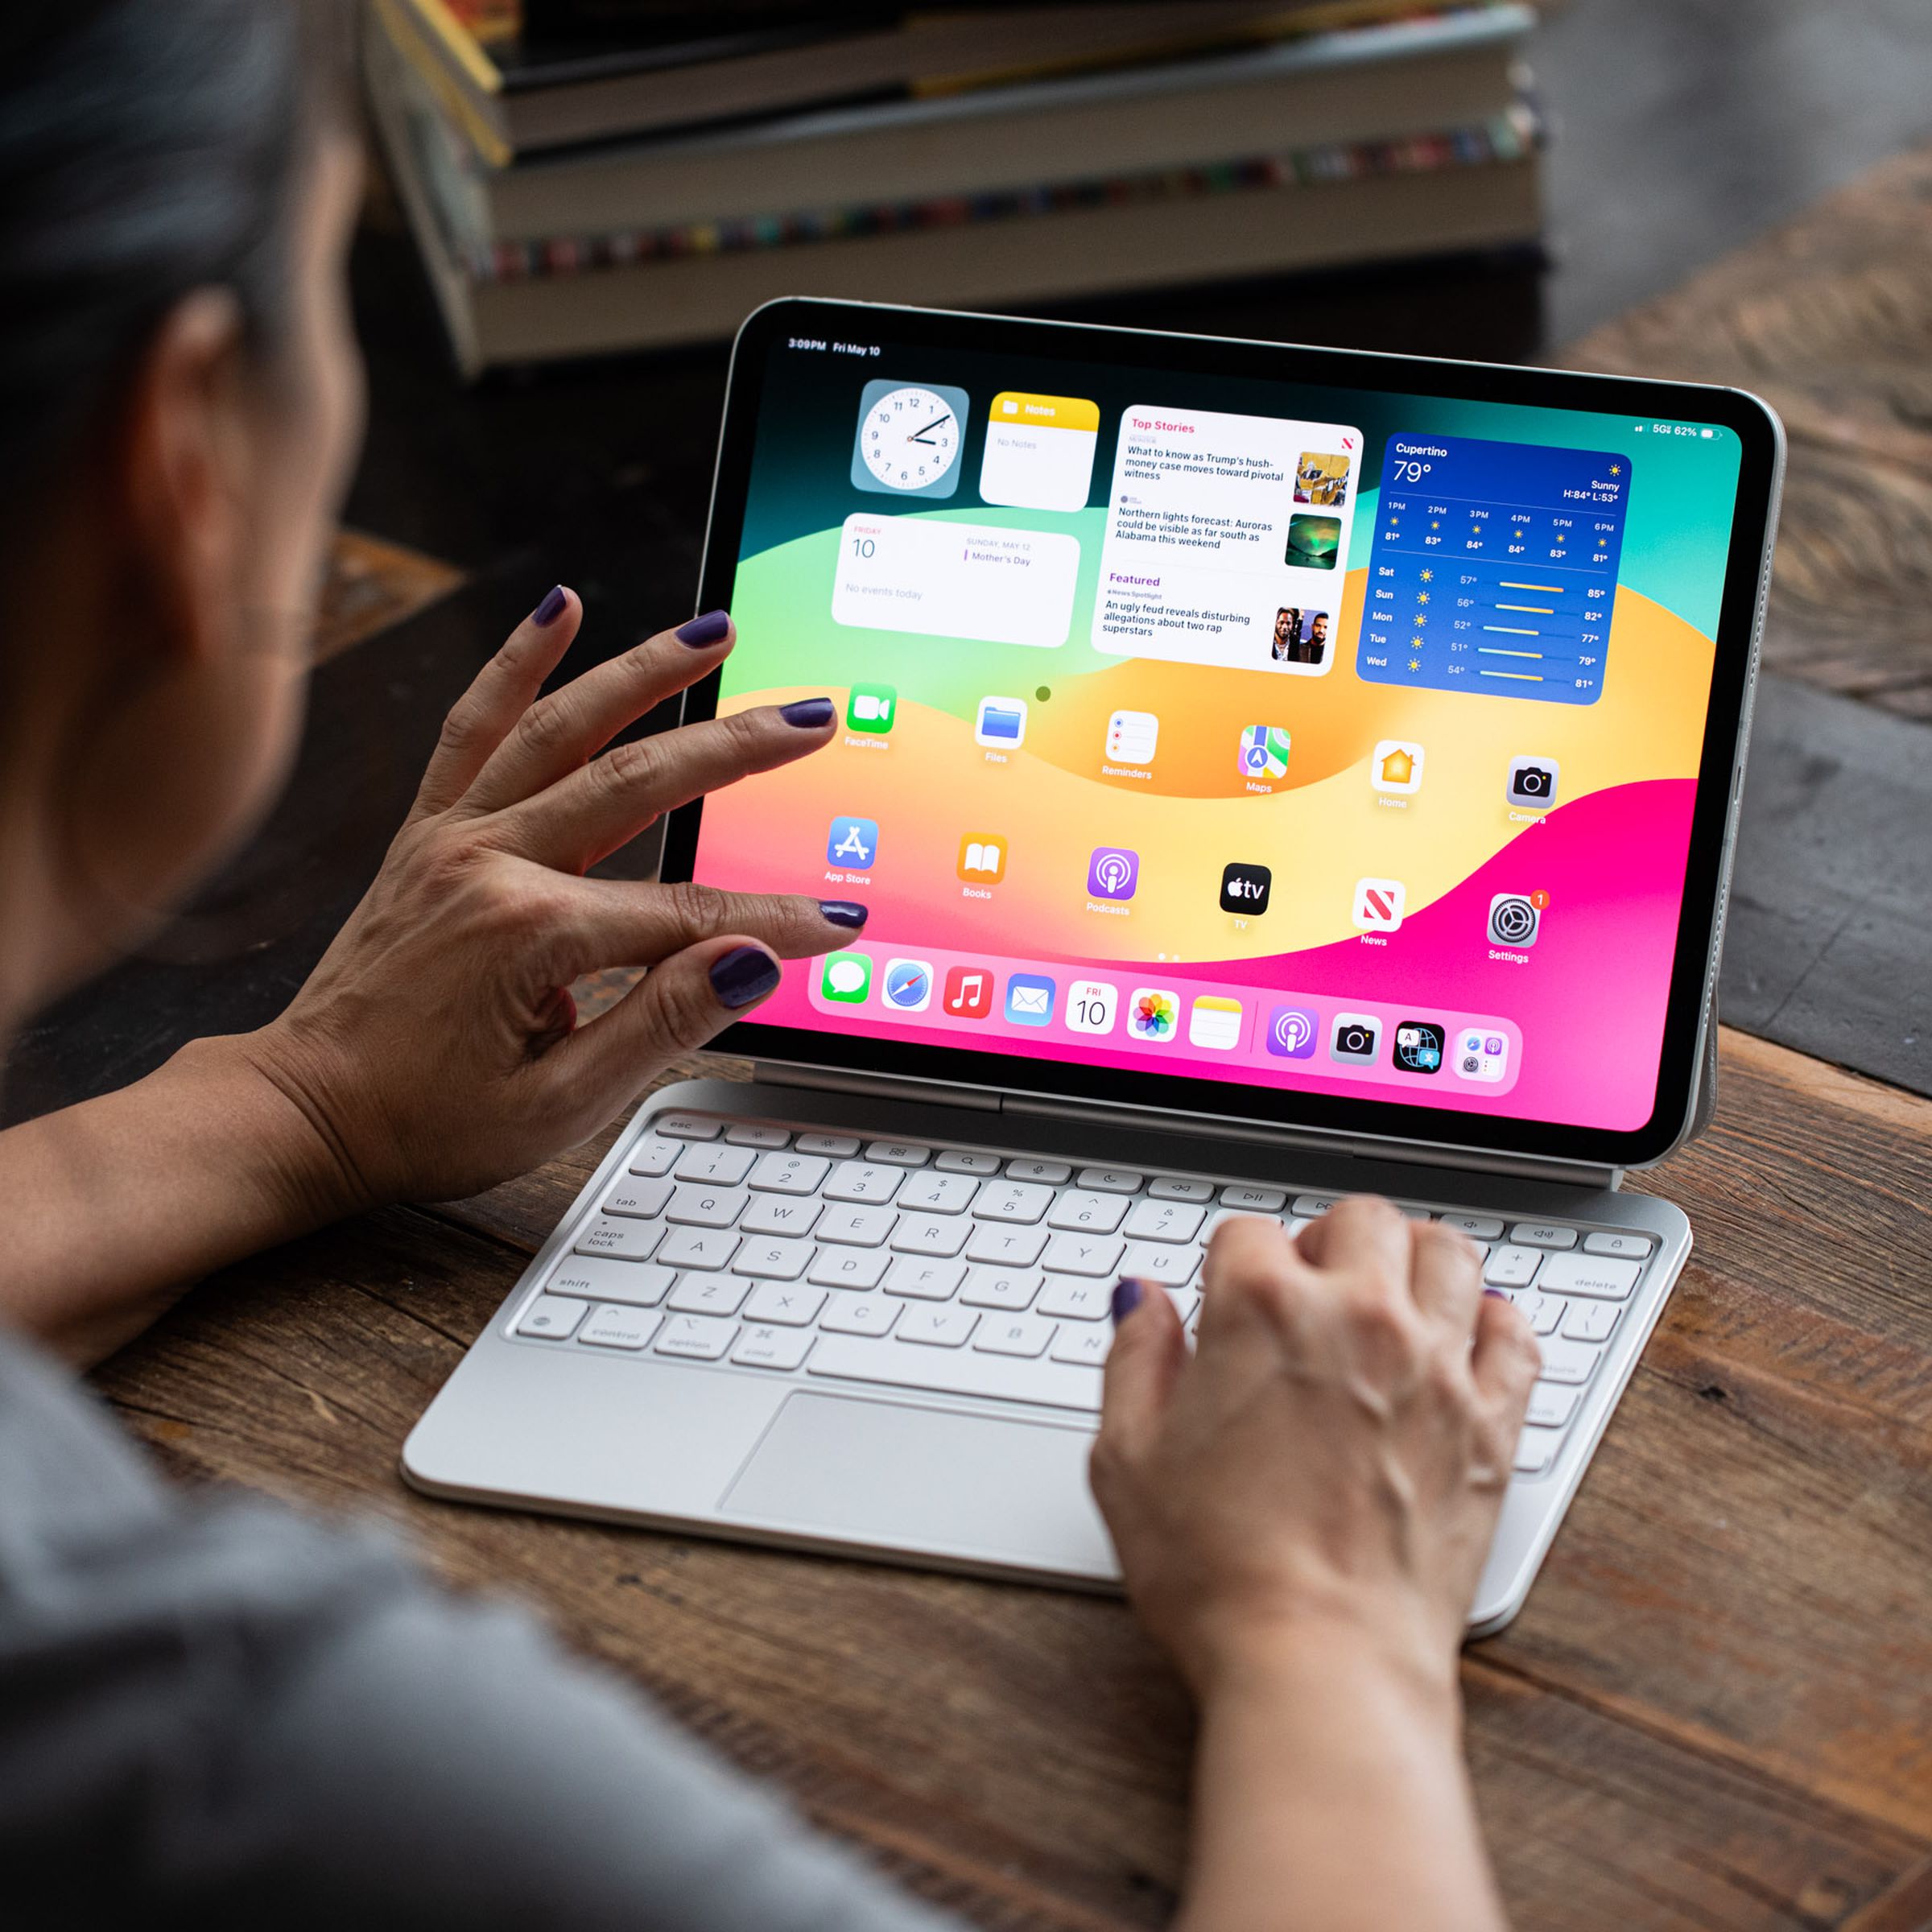 A photo of a person pinching the screen on an iPad Pro.